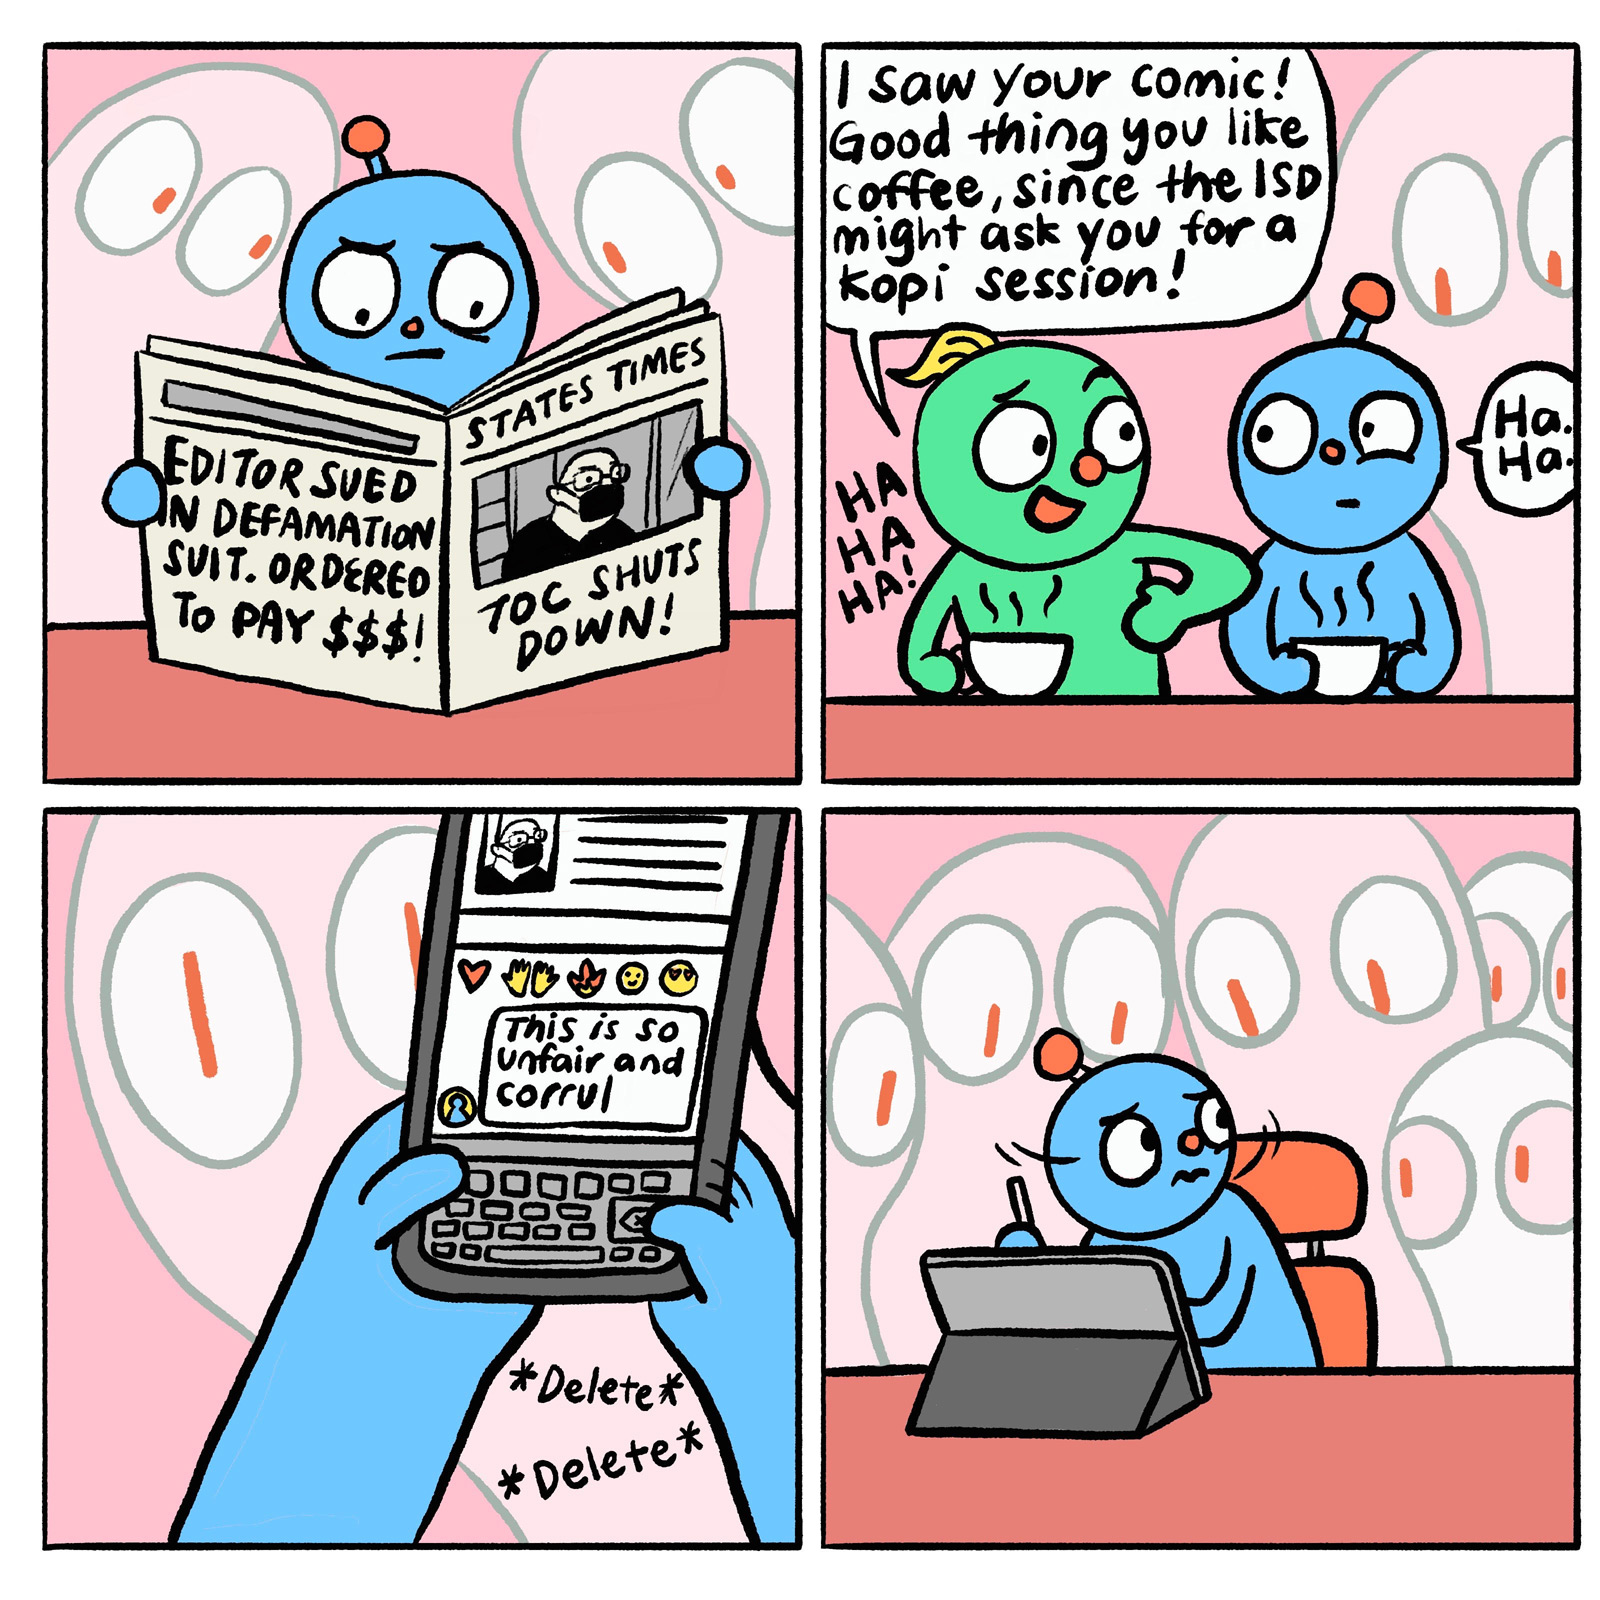 A four-panel comic in black lines and full colour.
Panel 1: a blue humanoid figure sits reading a newspaper. They are frowning. The headlines on the newspaper read: “Editor sued in defamation suit. Ordered to pay $$$! TOC (The Online Citizen) shuts down!”. Two faint figures with red pupils in their eyes loom over the figure from the back.
Panel 2: the blue figure is having coffee with a friend, a green figure with yellow hair, who says: “I saw your comic! Good thing you like coffee, since the ISD might ask you for a kopi session!” The blue figure has an apprehensive look on their face. Unamused, they reply: “Ha. Ha.” Another of the faint figures watches them in the background.
Panel 3: close-up of the blue figure’s hands, typing on their mobile phone. They are deleting a comment which they’d drafted under a post about the editor of TOC; it reads: “This is so unfair and corru-”
Panel 4: the blue figure, seated and drawing on an iPad, looks around fearfully at the faint figures staring at them.
